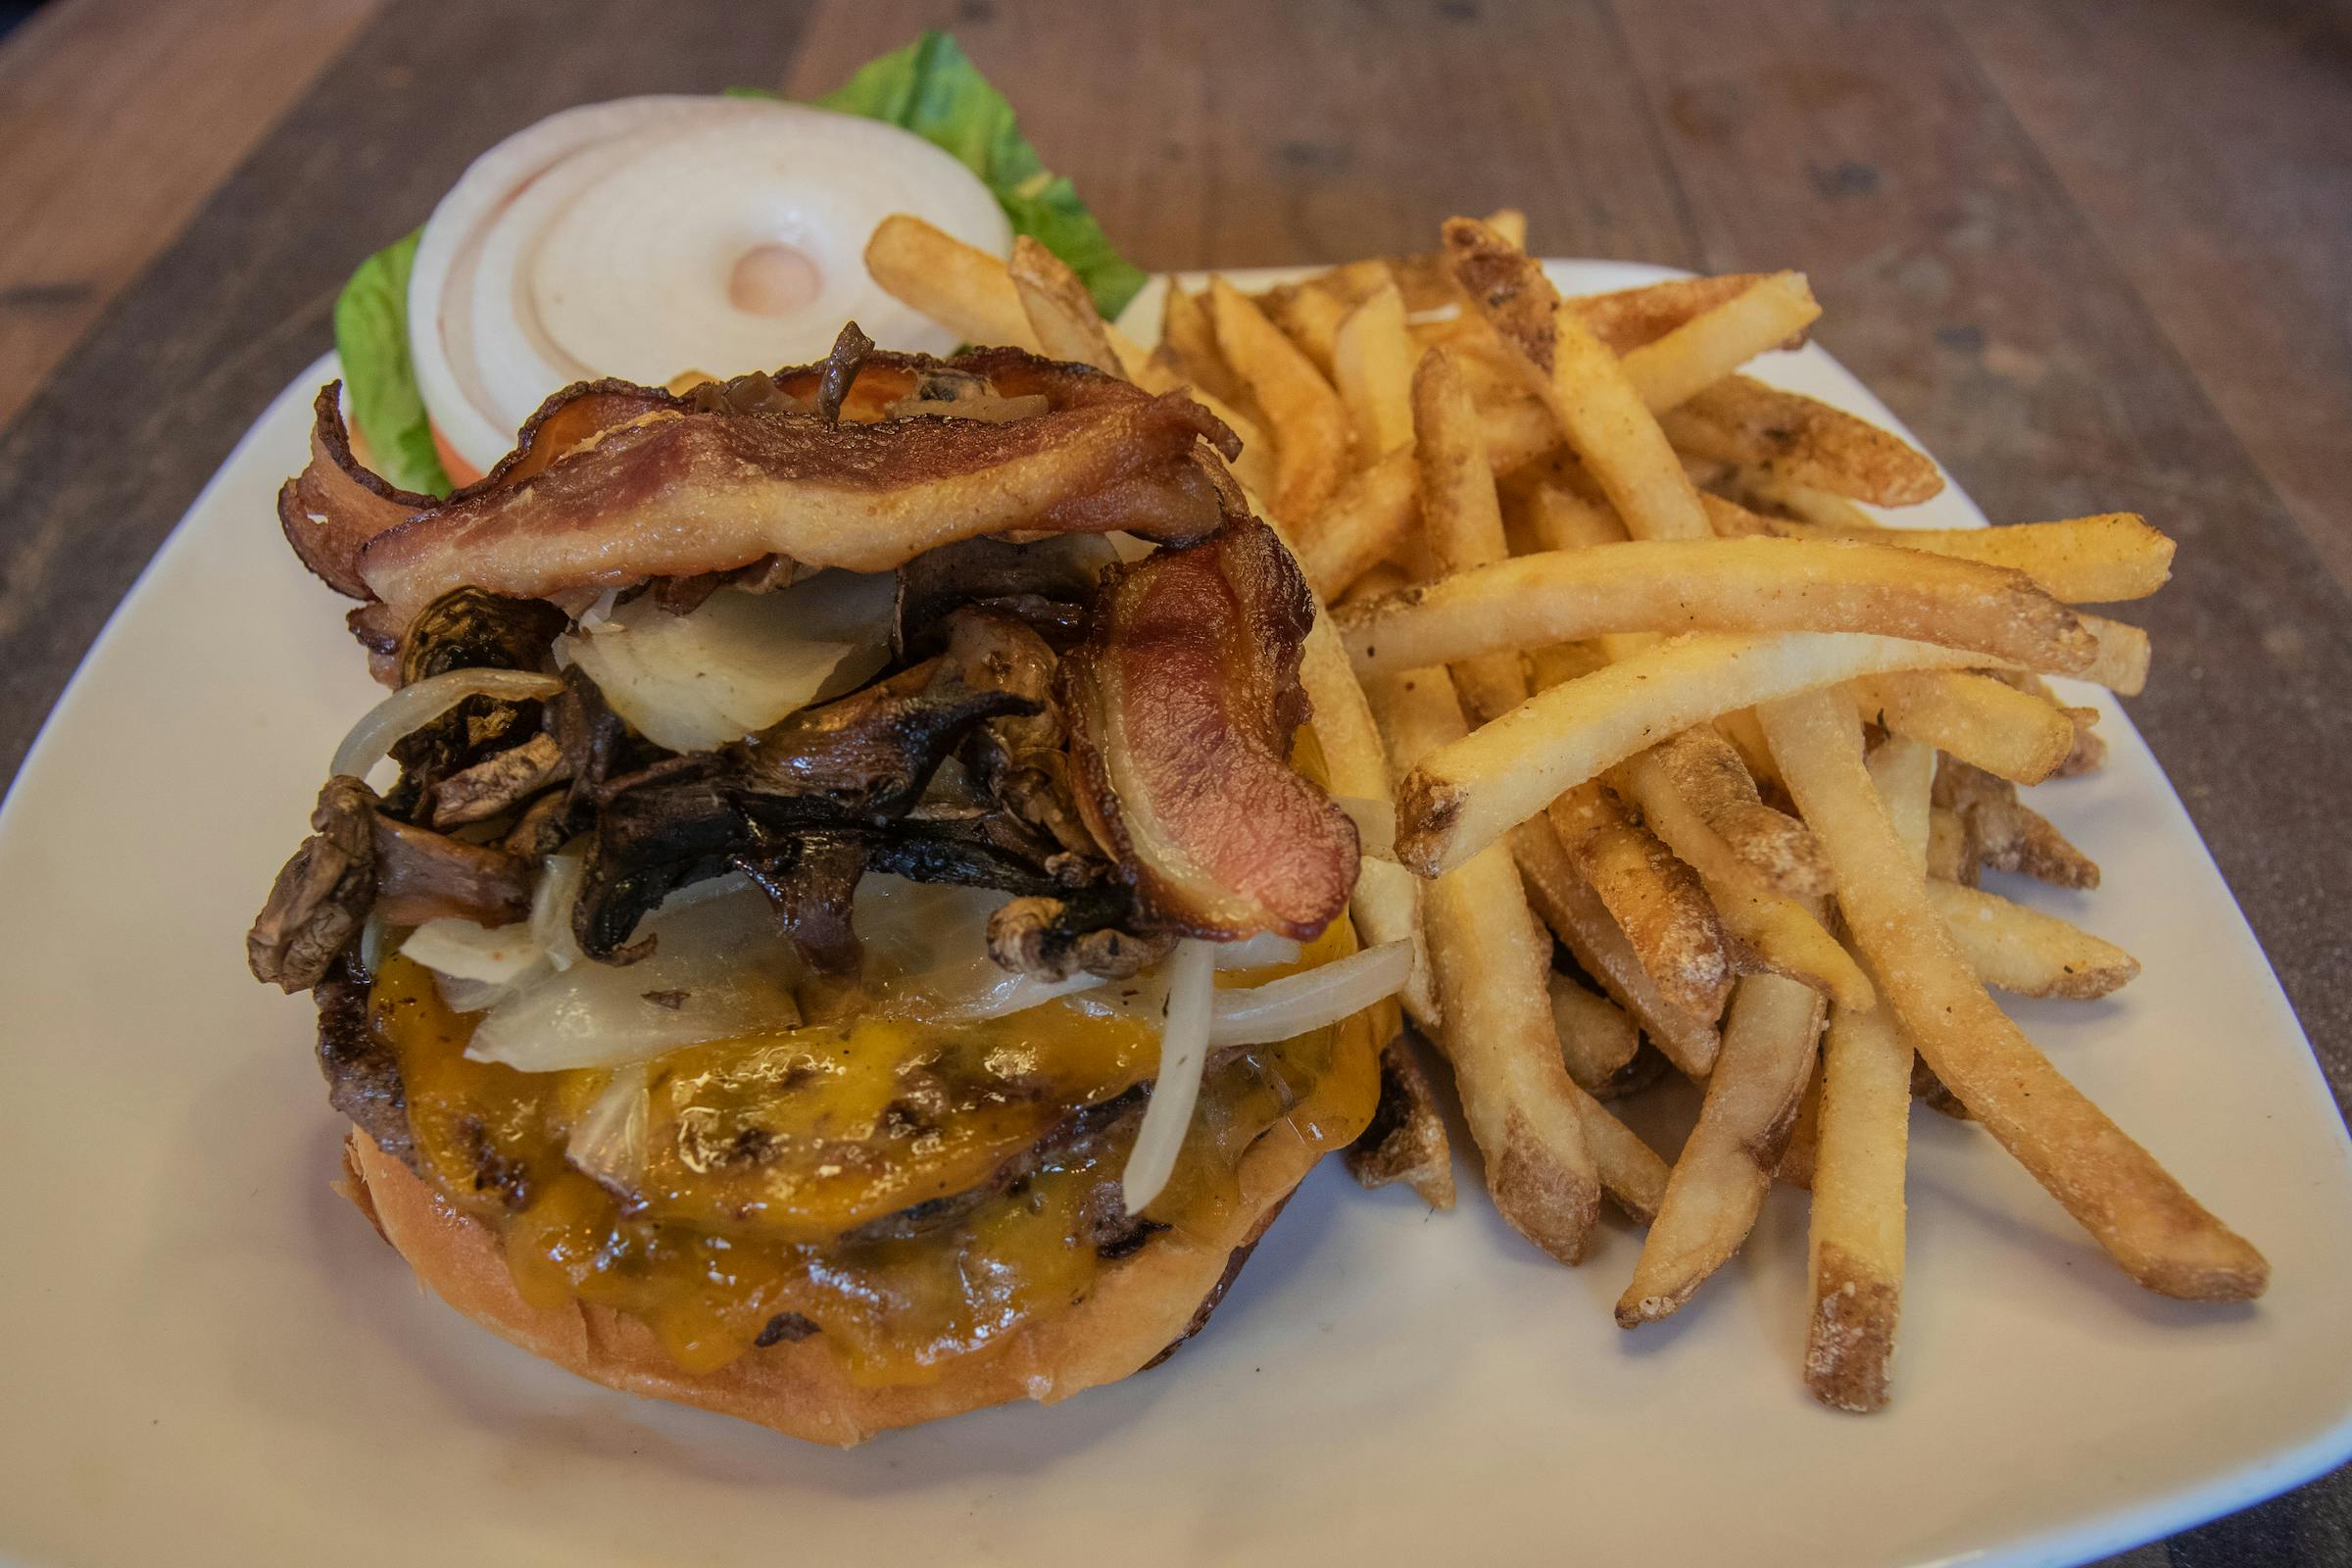 Station 2 Burger from Firehouse Grill - Chicago Ave in Evanston, IL